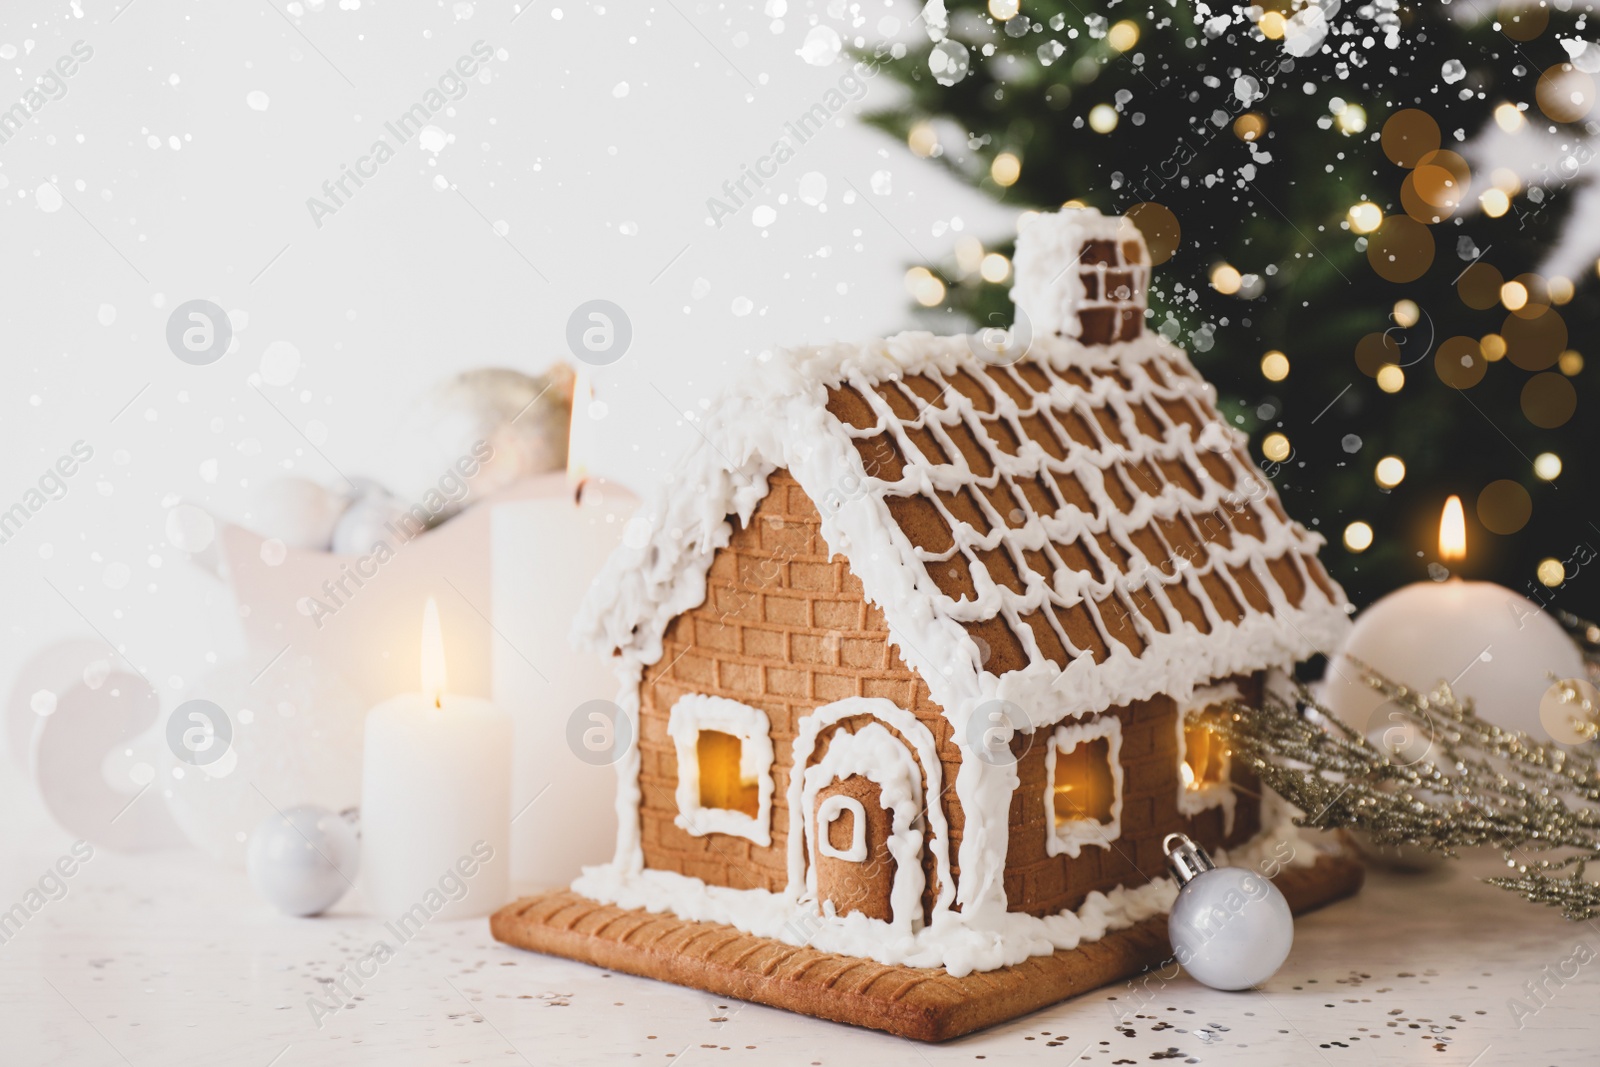 Image of Beautiful gingerbread house decorated with icing and candles on white table